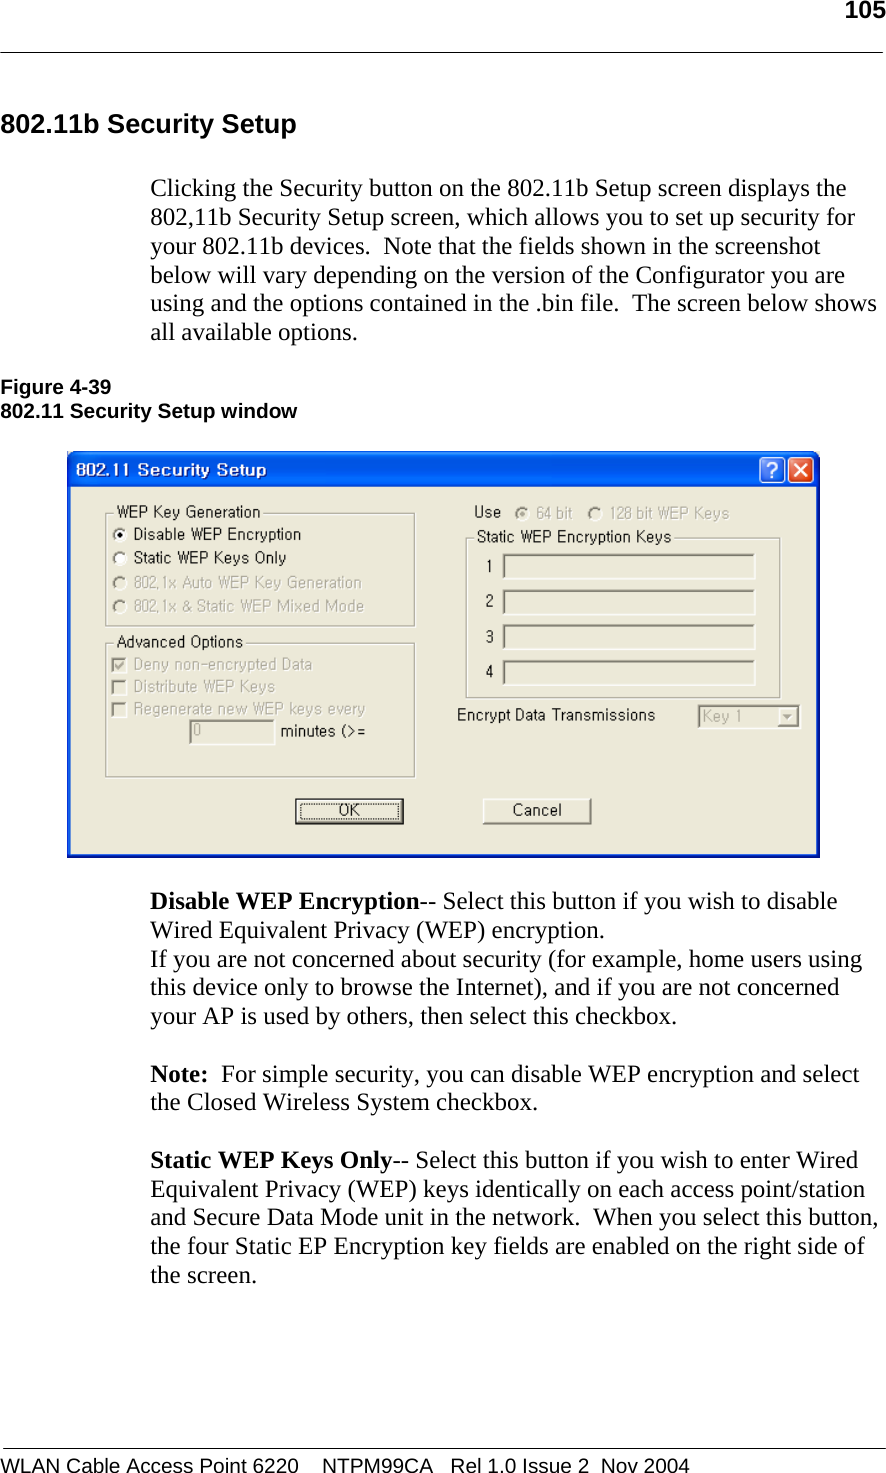   105  WLAN Cable Access Point 6220    NTPM99CA   Rel 1.0 Issue 2  Nov 2004 802.11b Security Setup  Clicking the Security button on the 802.11b Setup screen displays the 802,11b Security Setup screen, which allows you to set up security for your 802.11b devices.  Note that the fields shown in the screenshot below will vary depending on the version of the Configurator you are using and the options contained in the .bin file.  The screen below shows all available options.  Figure 4-39 802.11 Security Setup window    Disable WEP Encryption-- Select this button if you wish to disable Wired Equivalent Privacy (WEP) encryption. If you are not concerned about security (for example, home users using this device only to browse the Internet), and if you are not concerned your AP is used by others, then select this checkbox.  Note:  For simple security, you can disable WEP encryption and select the Closed Wireless System checkbox.    Static WEP Keys Only-- Select this button if you wish to enter Wired Equivalent Privacy (WEP) keys identically on each access point/station and Secure Data Mode unit in the network.  When you select this button, the four Static EP Encryption key fields are enabled on the right side of the screen.